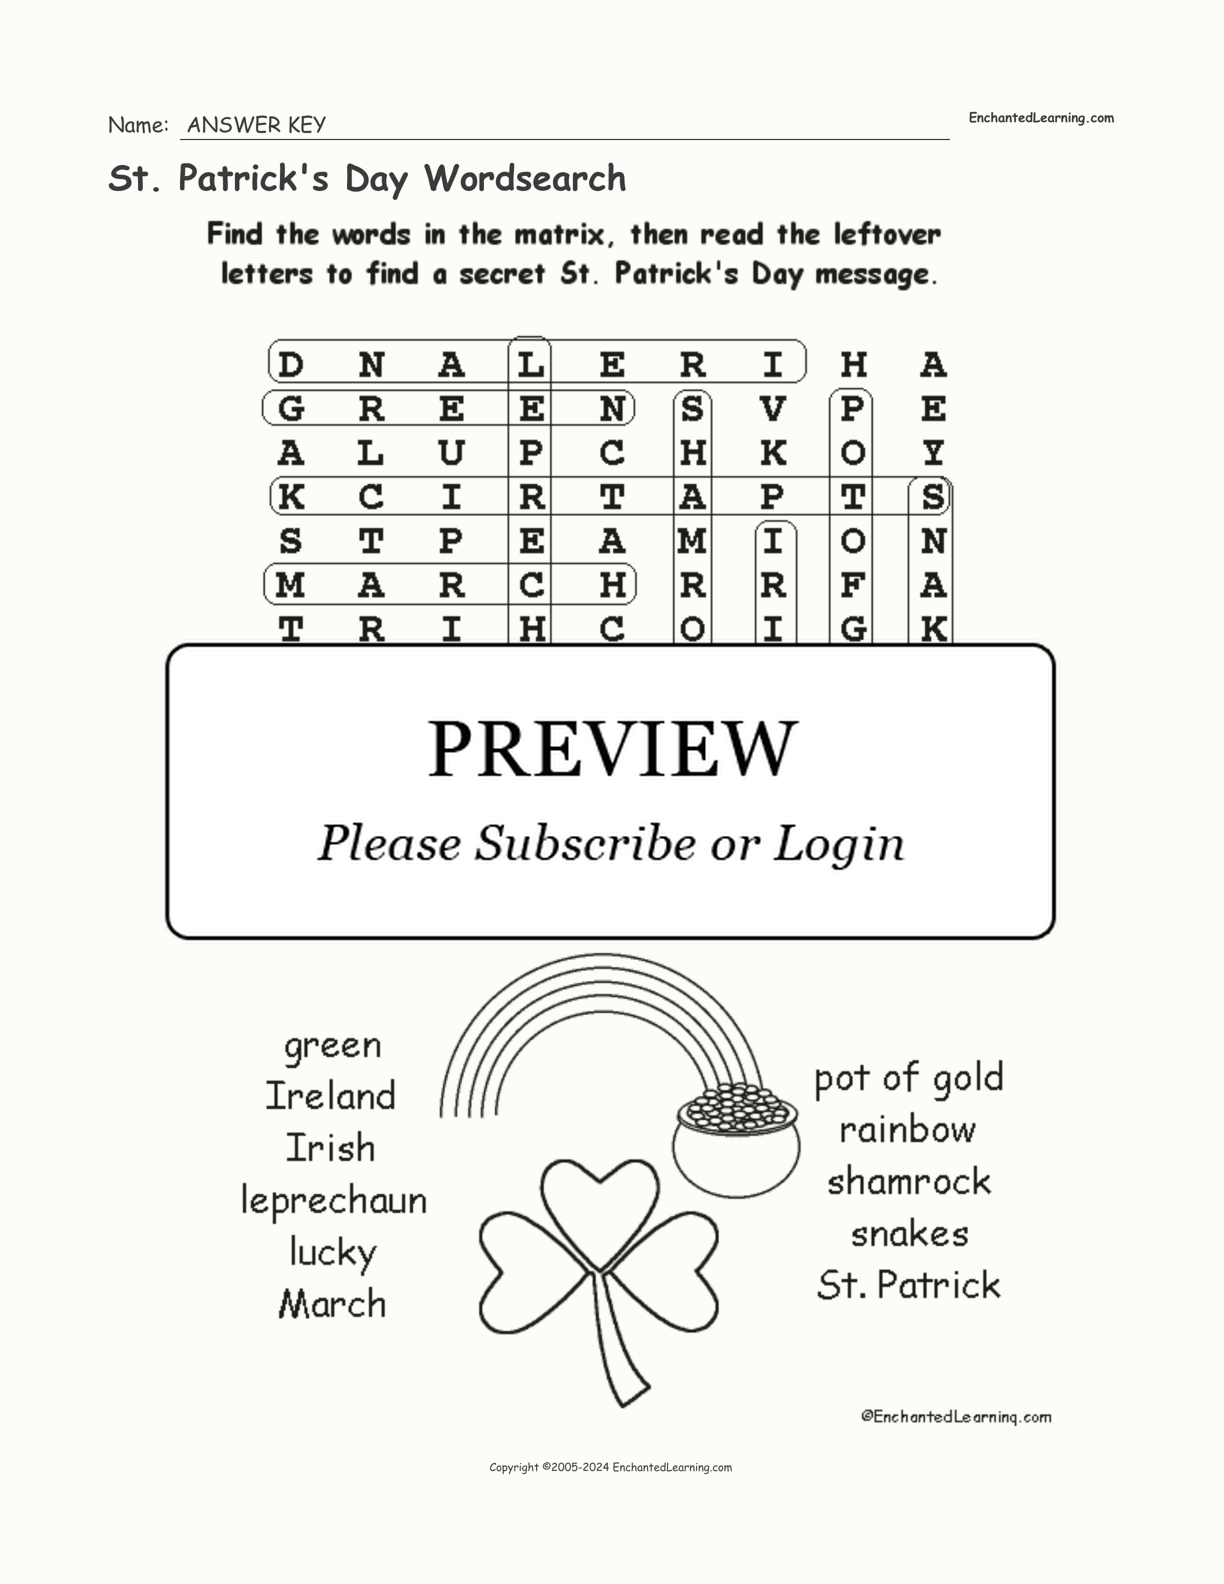 St. Patrick's Day Wordsearch interactive worksheet page 2